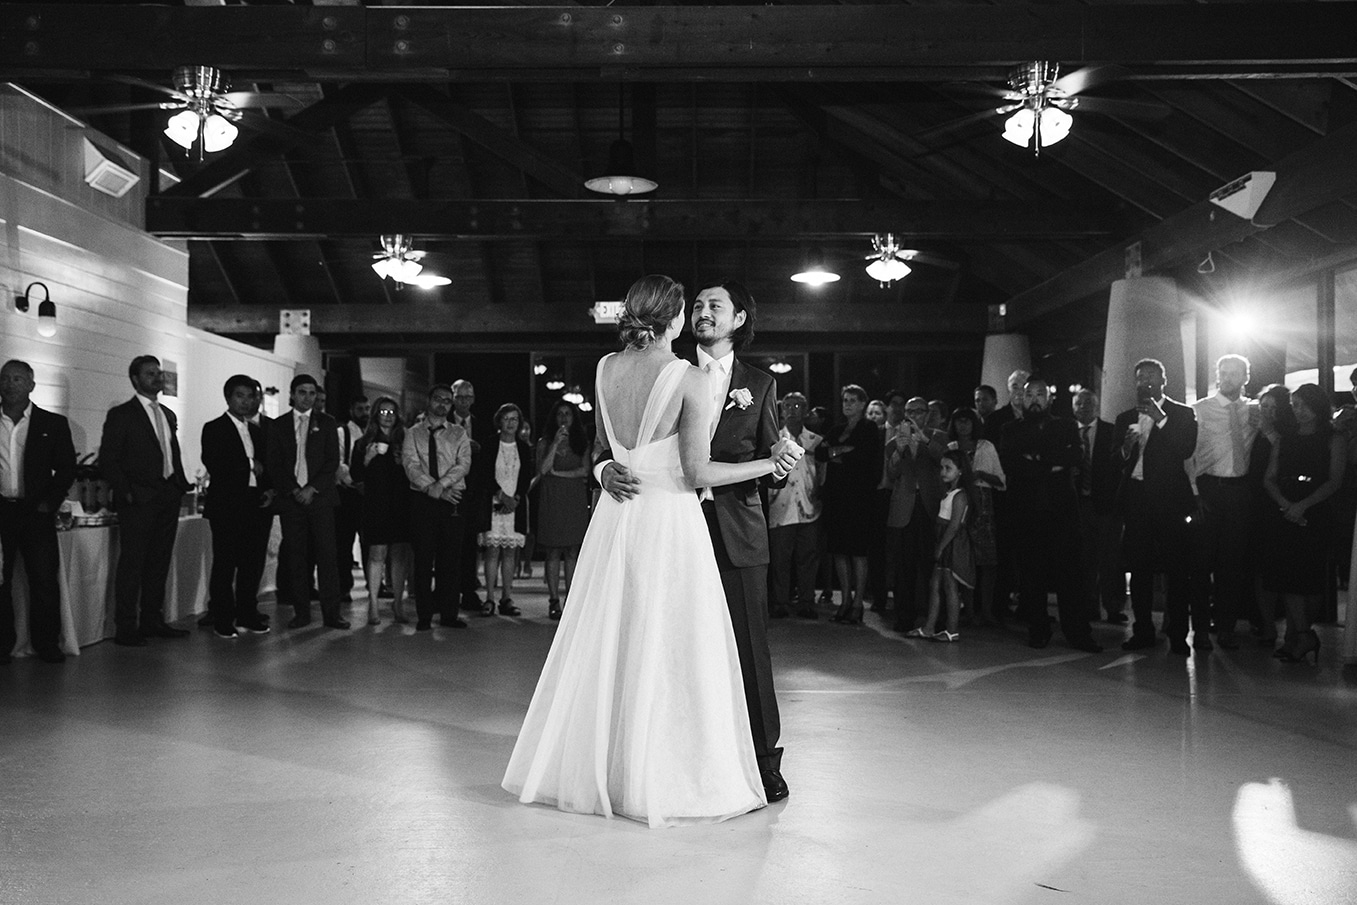 A documentary photograph of a bride and groom sharing their first dance at a plimoth plantation wedding in plymouth, massachusetts